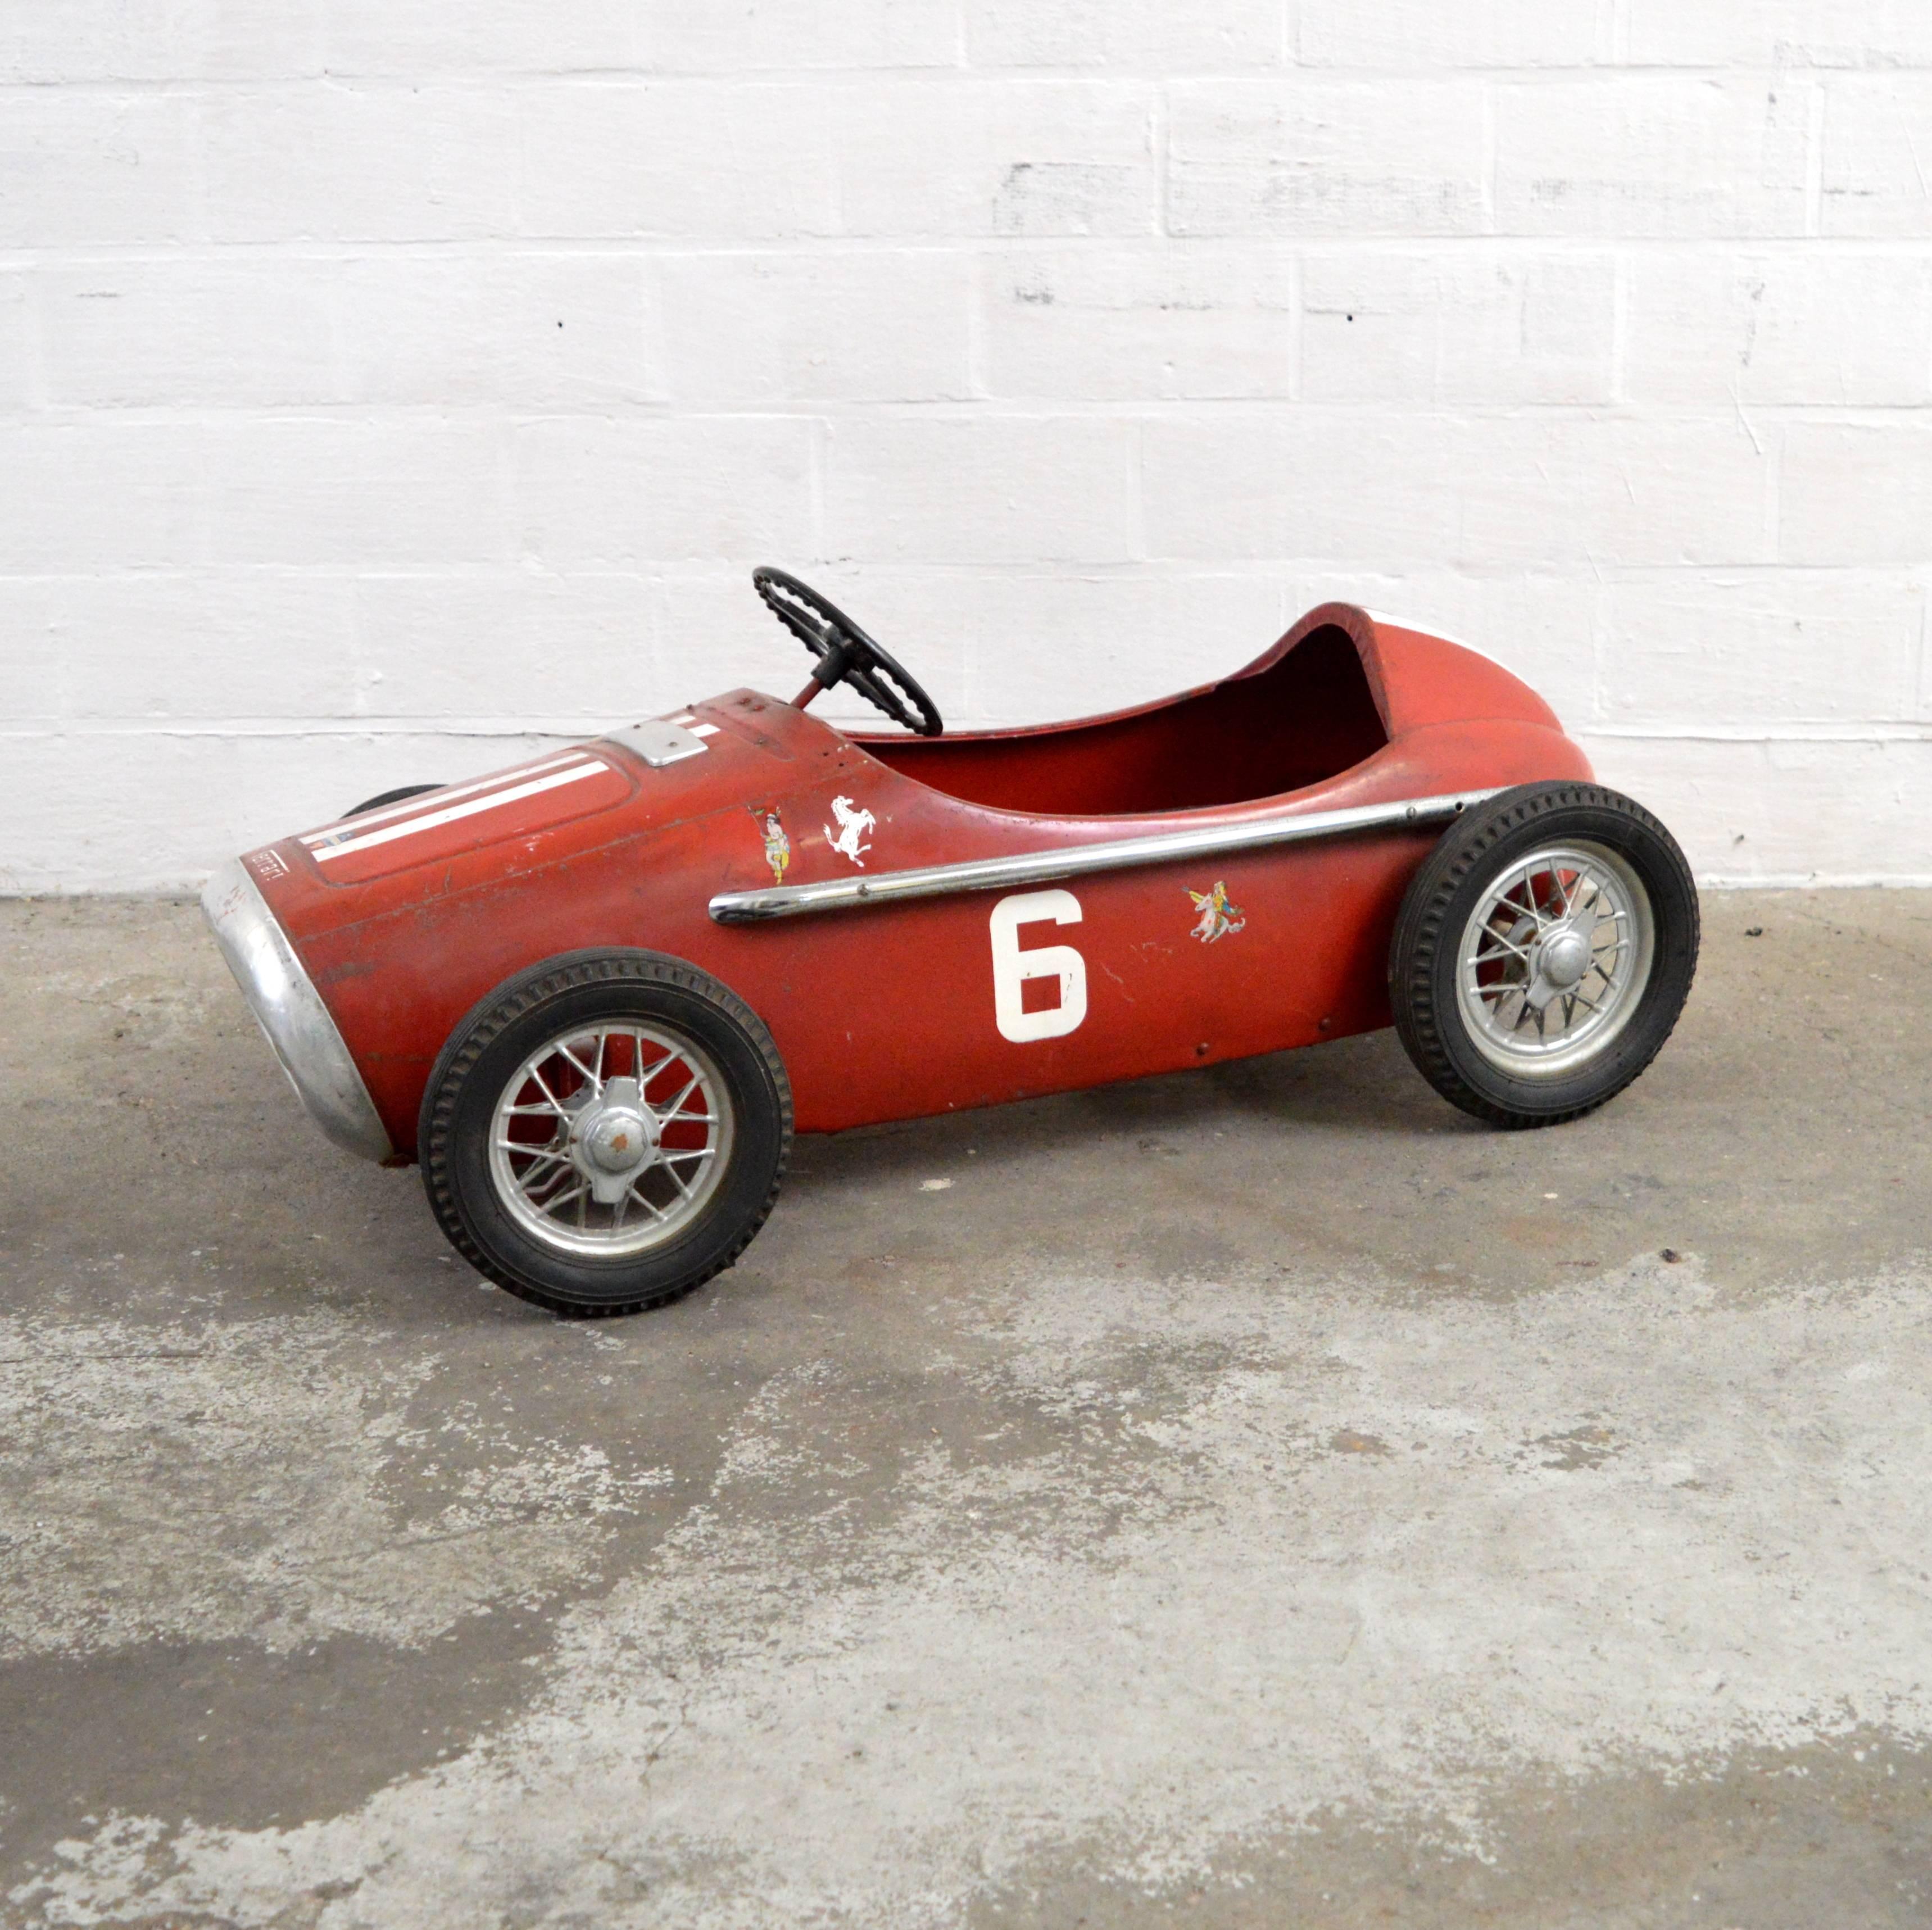 Rare pedal car of the brand Ferrari model Indy.
Is still in a very good condition and completely original.
All components are present, only the seat is missing.